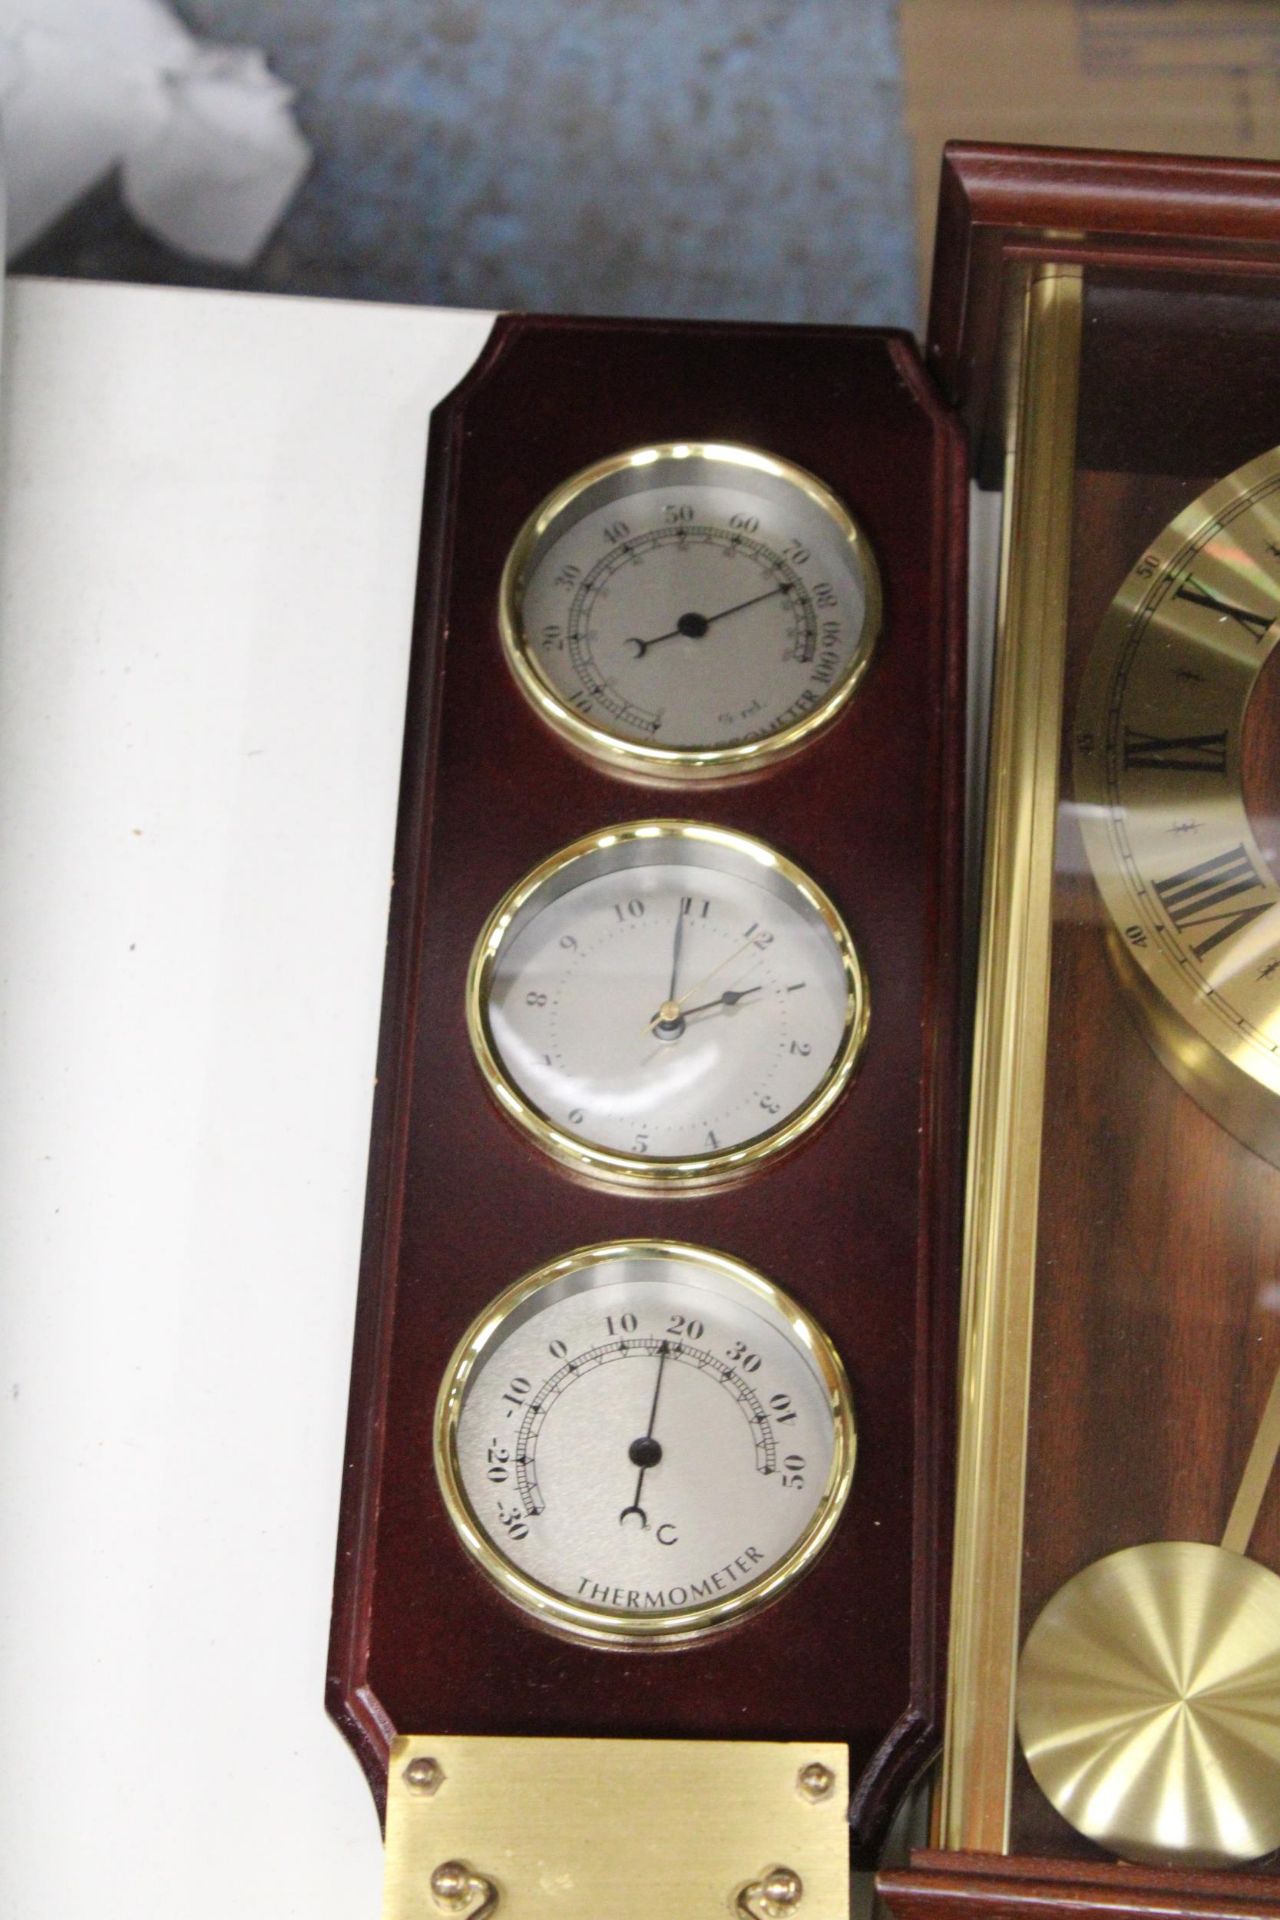 A METAMAC QUARTZ WALL CLOCK, A CARRIAGE CLOCK AND A BAROMETER, CLOCK AND THERMOMETER IN A WOODEN - Image 3 of 6